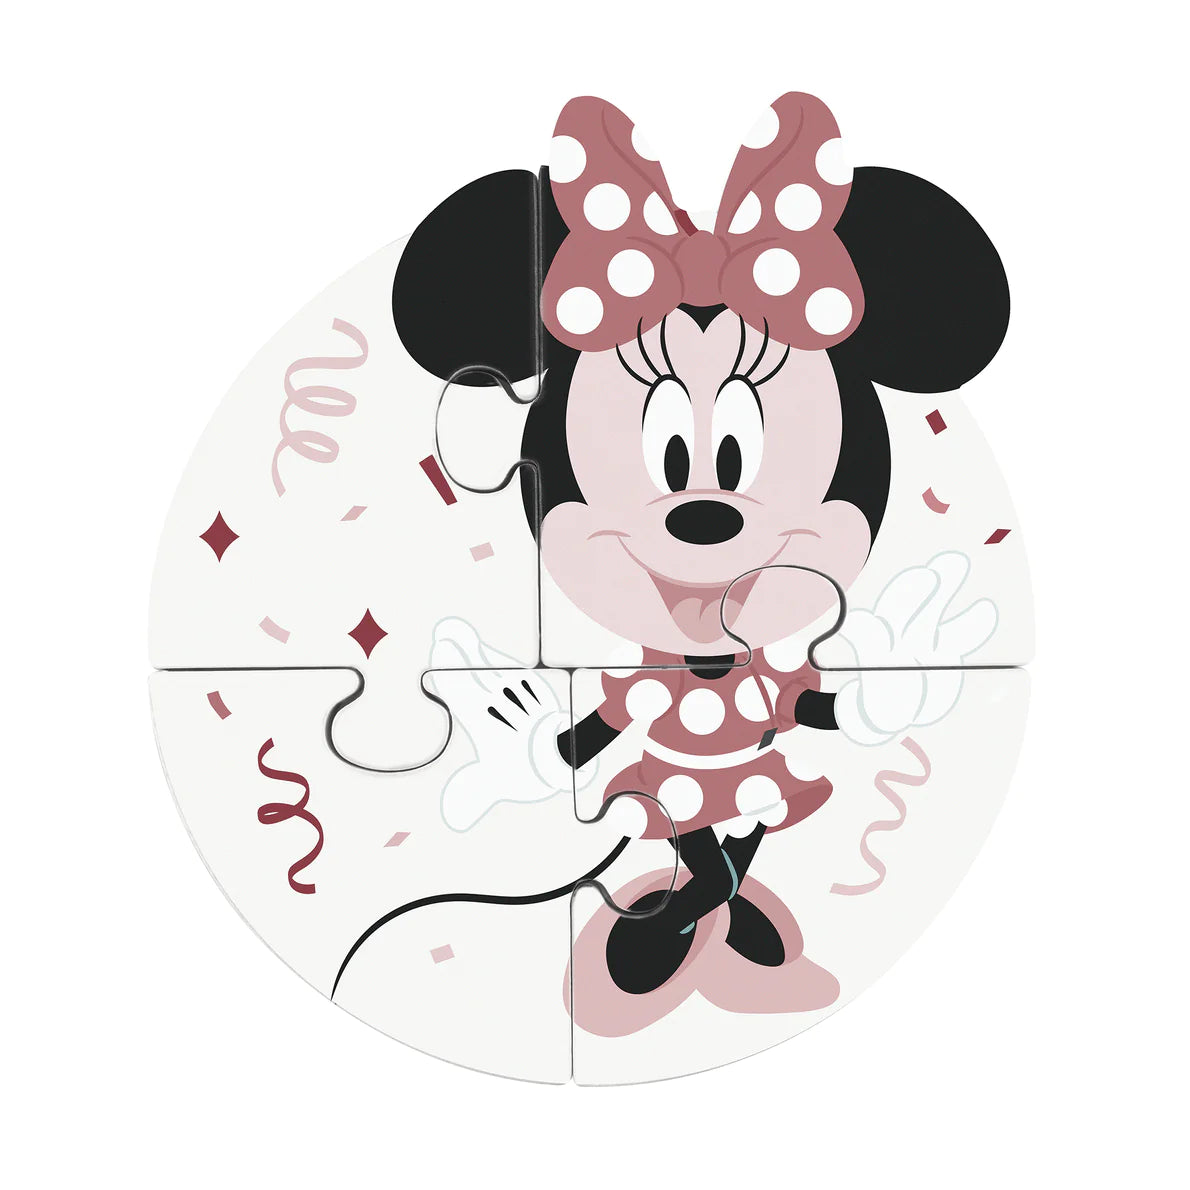 Disney Mickey Mouse Wooden Chunky Puzzle